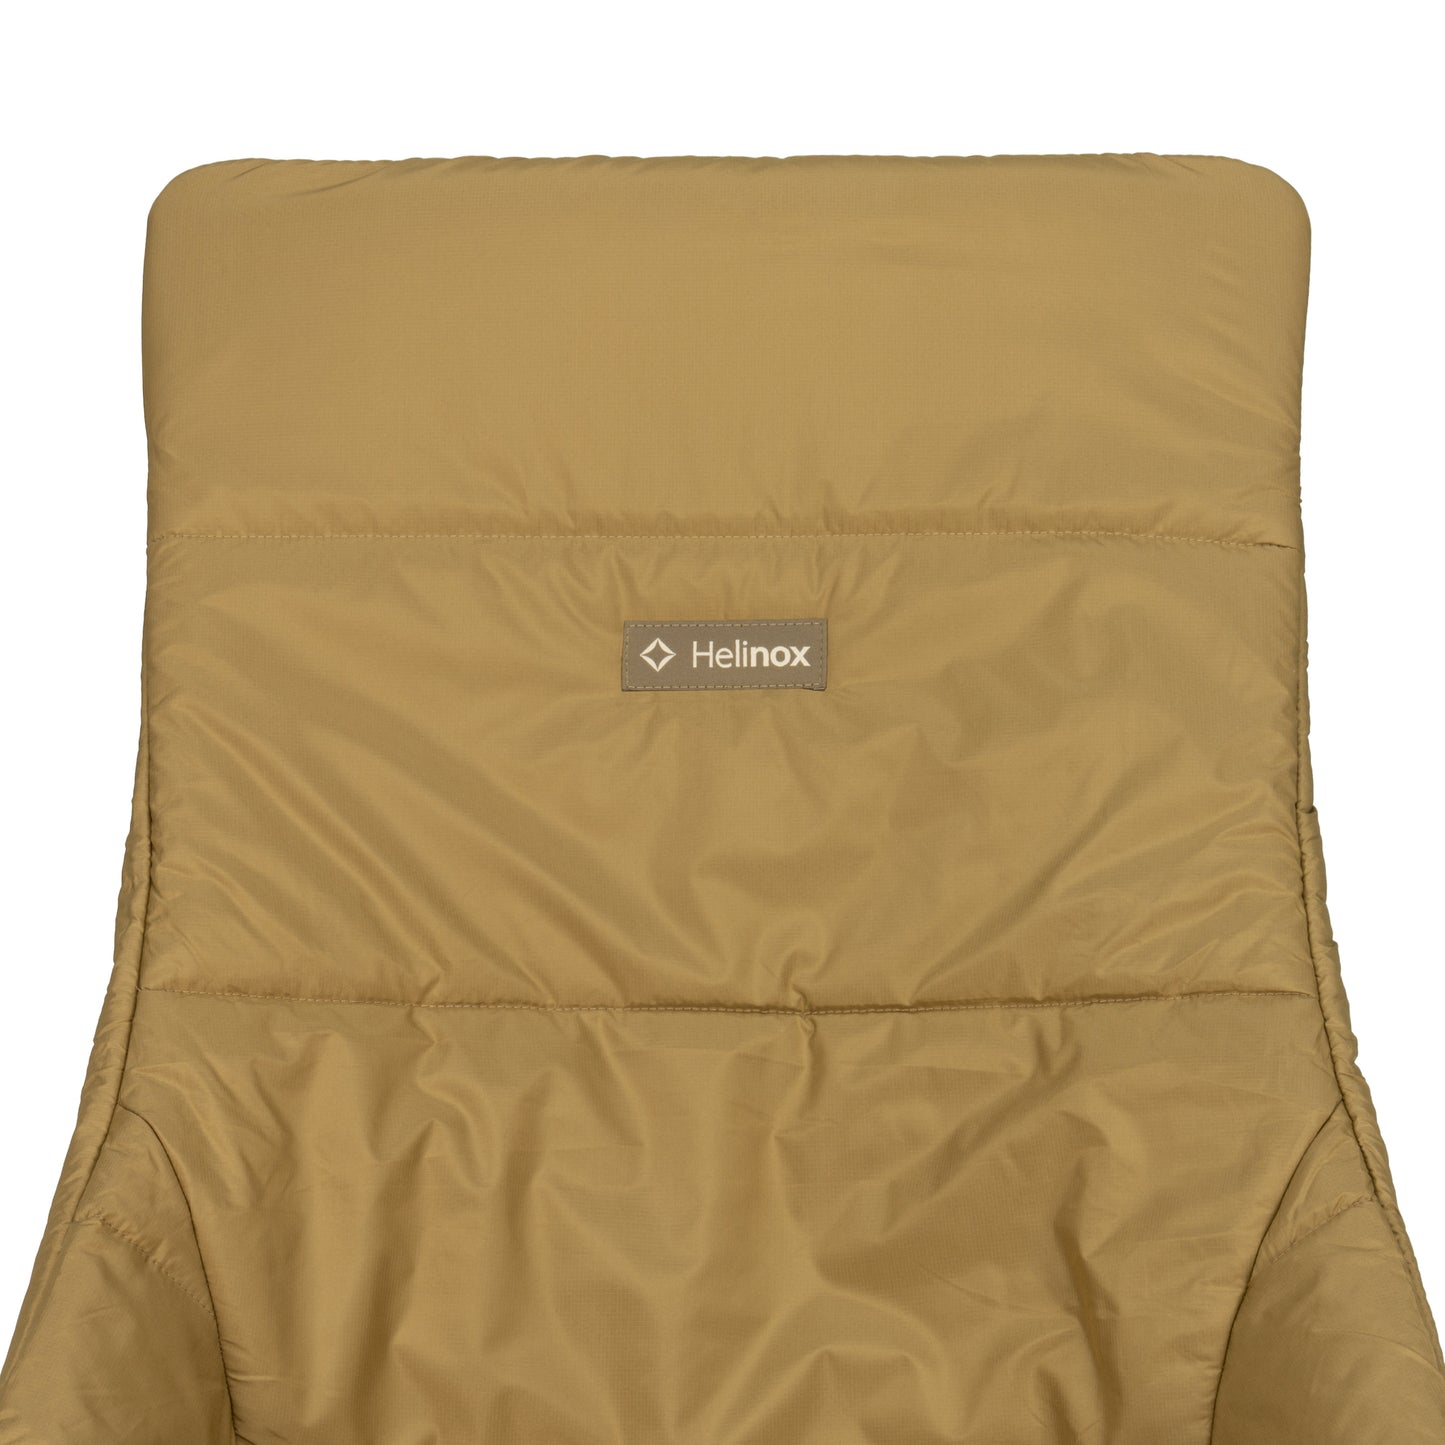 Seat Warmer for Sunset/Beach - Black/Coyote Tan